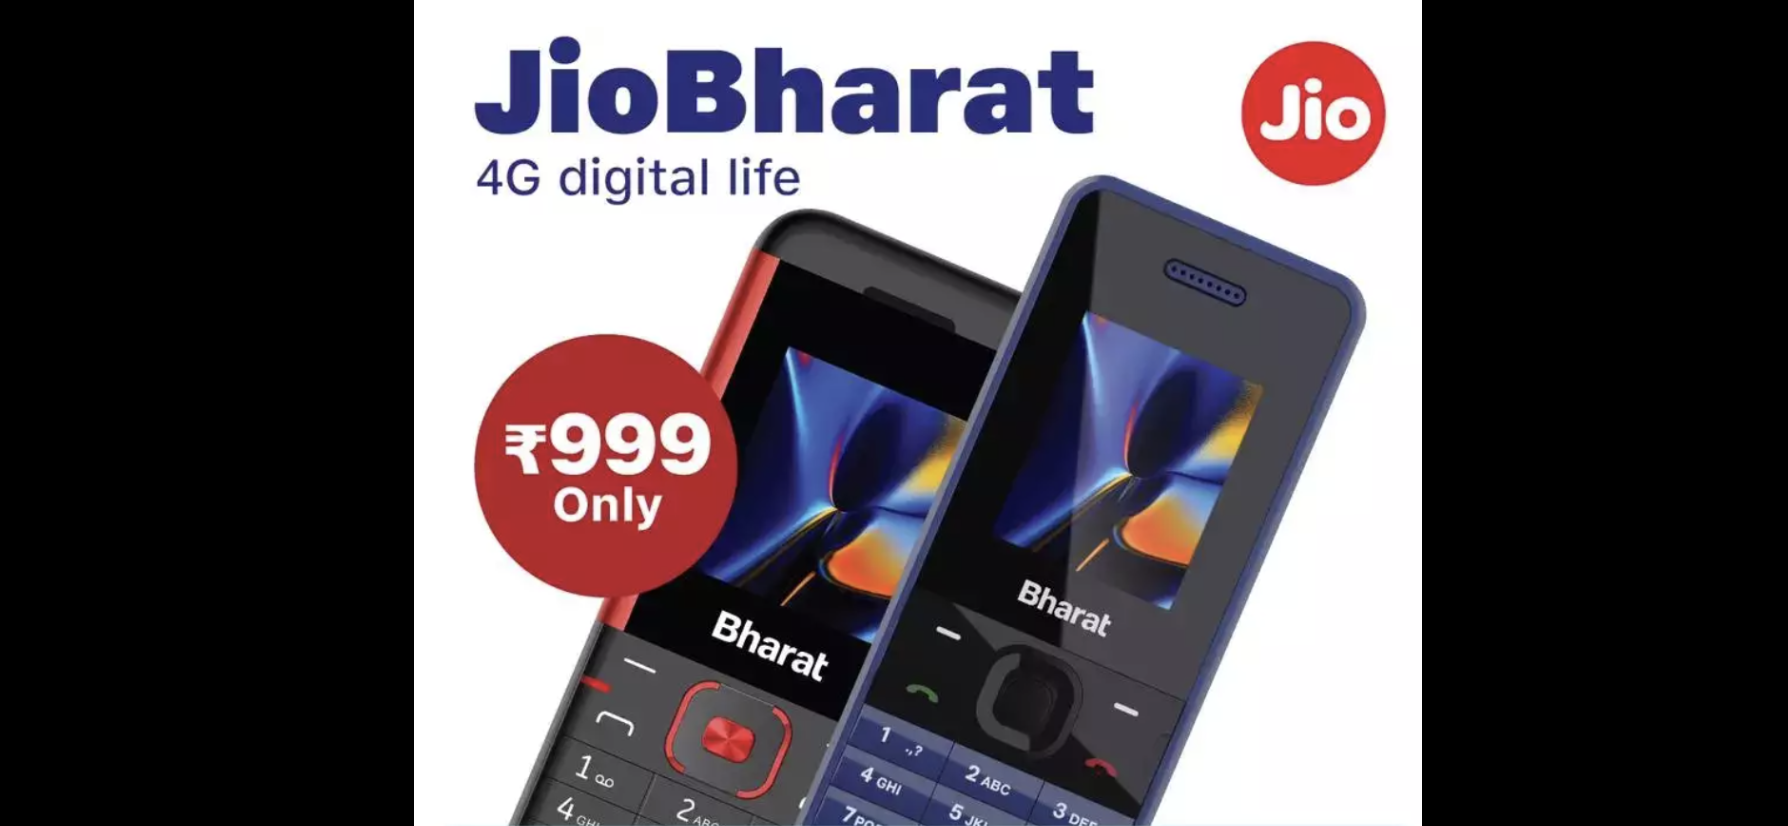 Jio Bharat 4G Phone Launched At Rs 999 With UPI, Camera (Check Top Features)